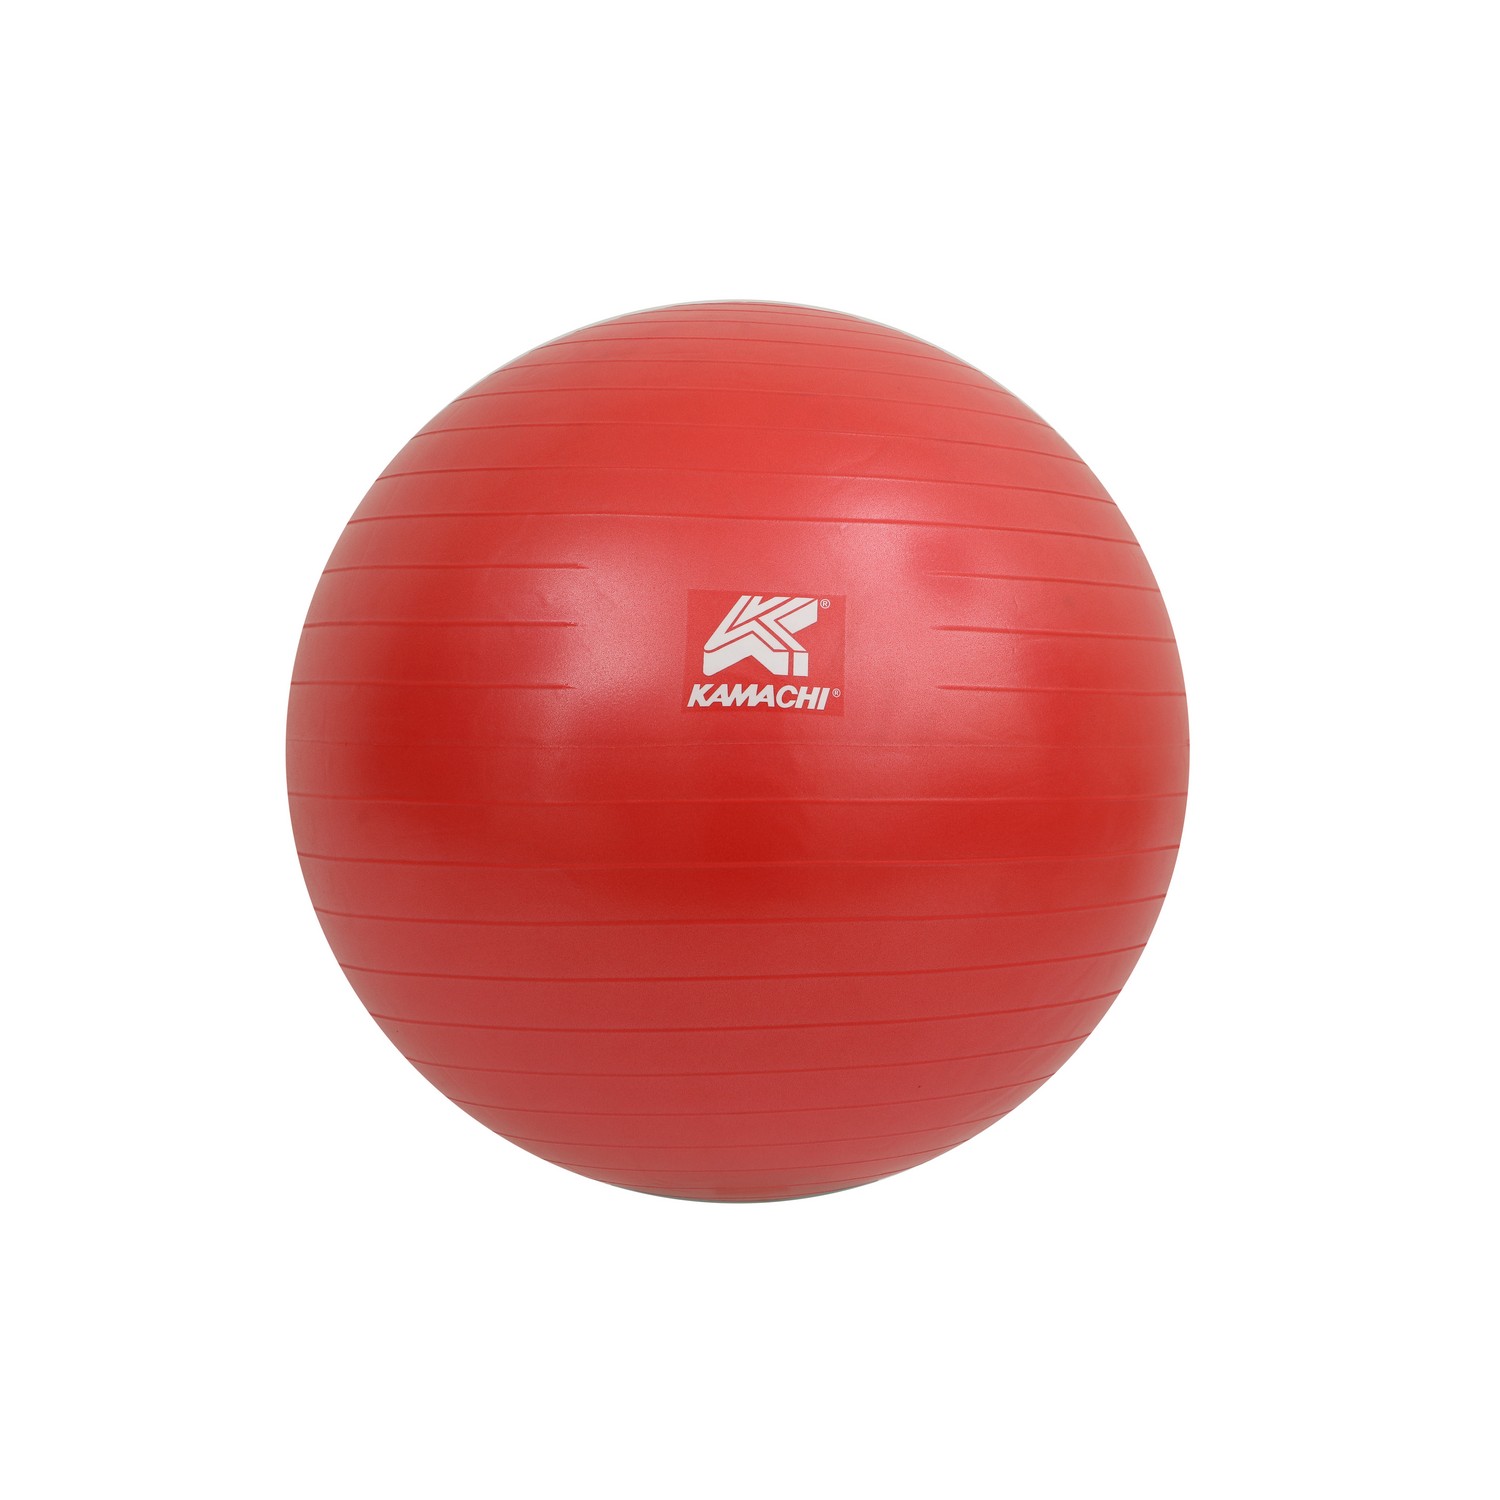 Kamachi 85 Cms Gym Ball With Foot Pump - Red